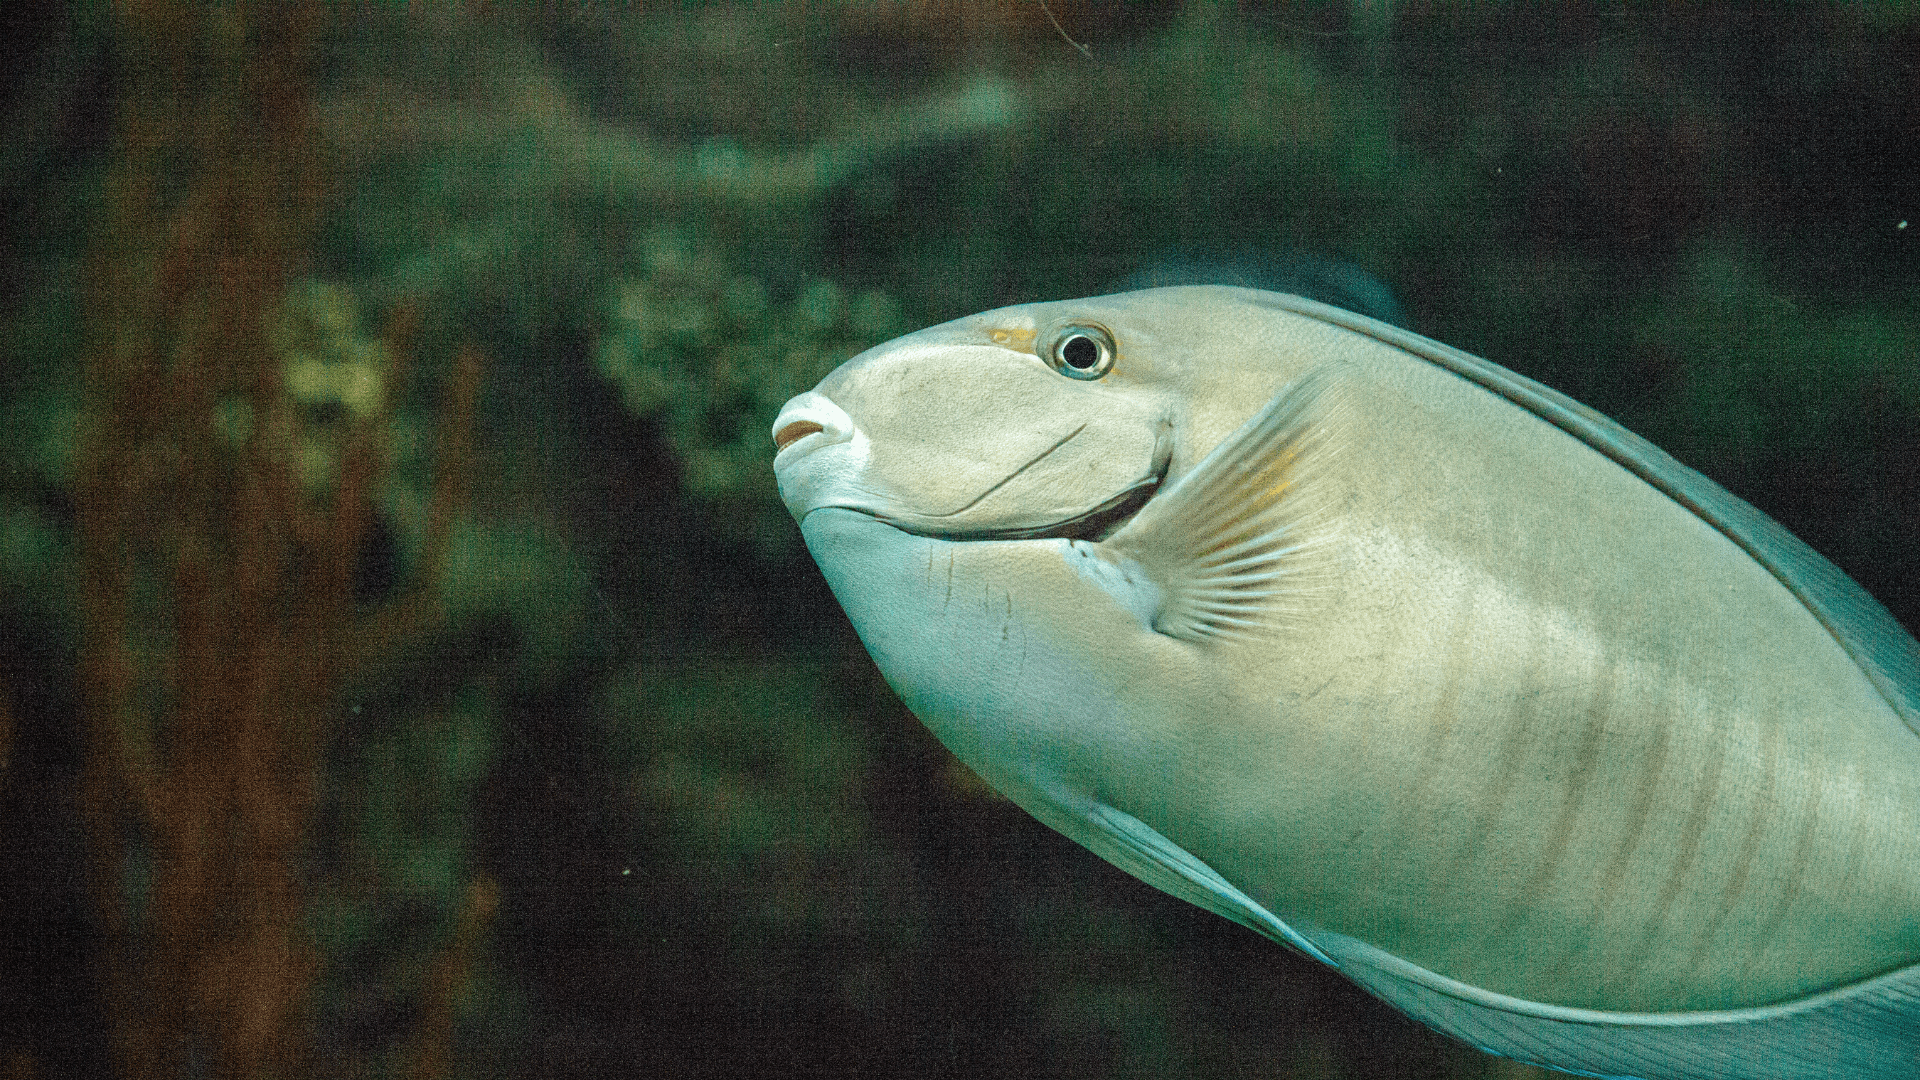 A photo of Doctorfish